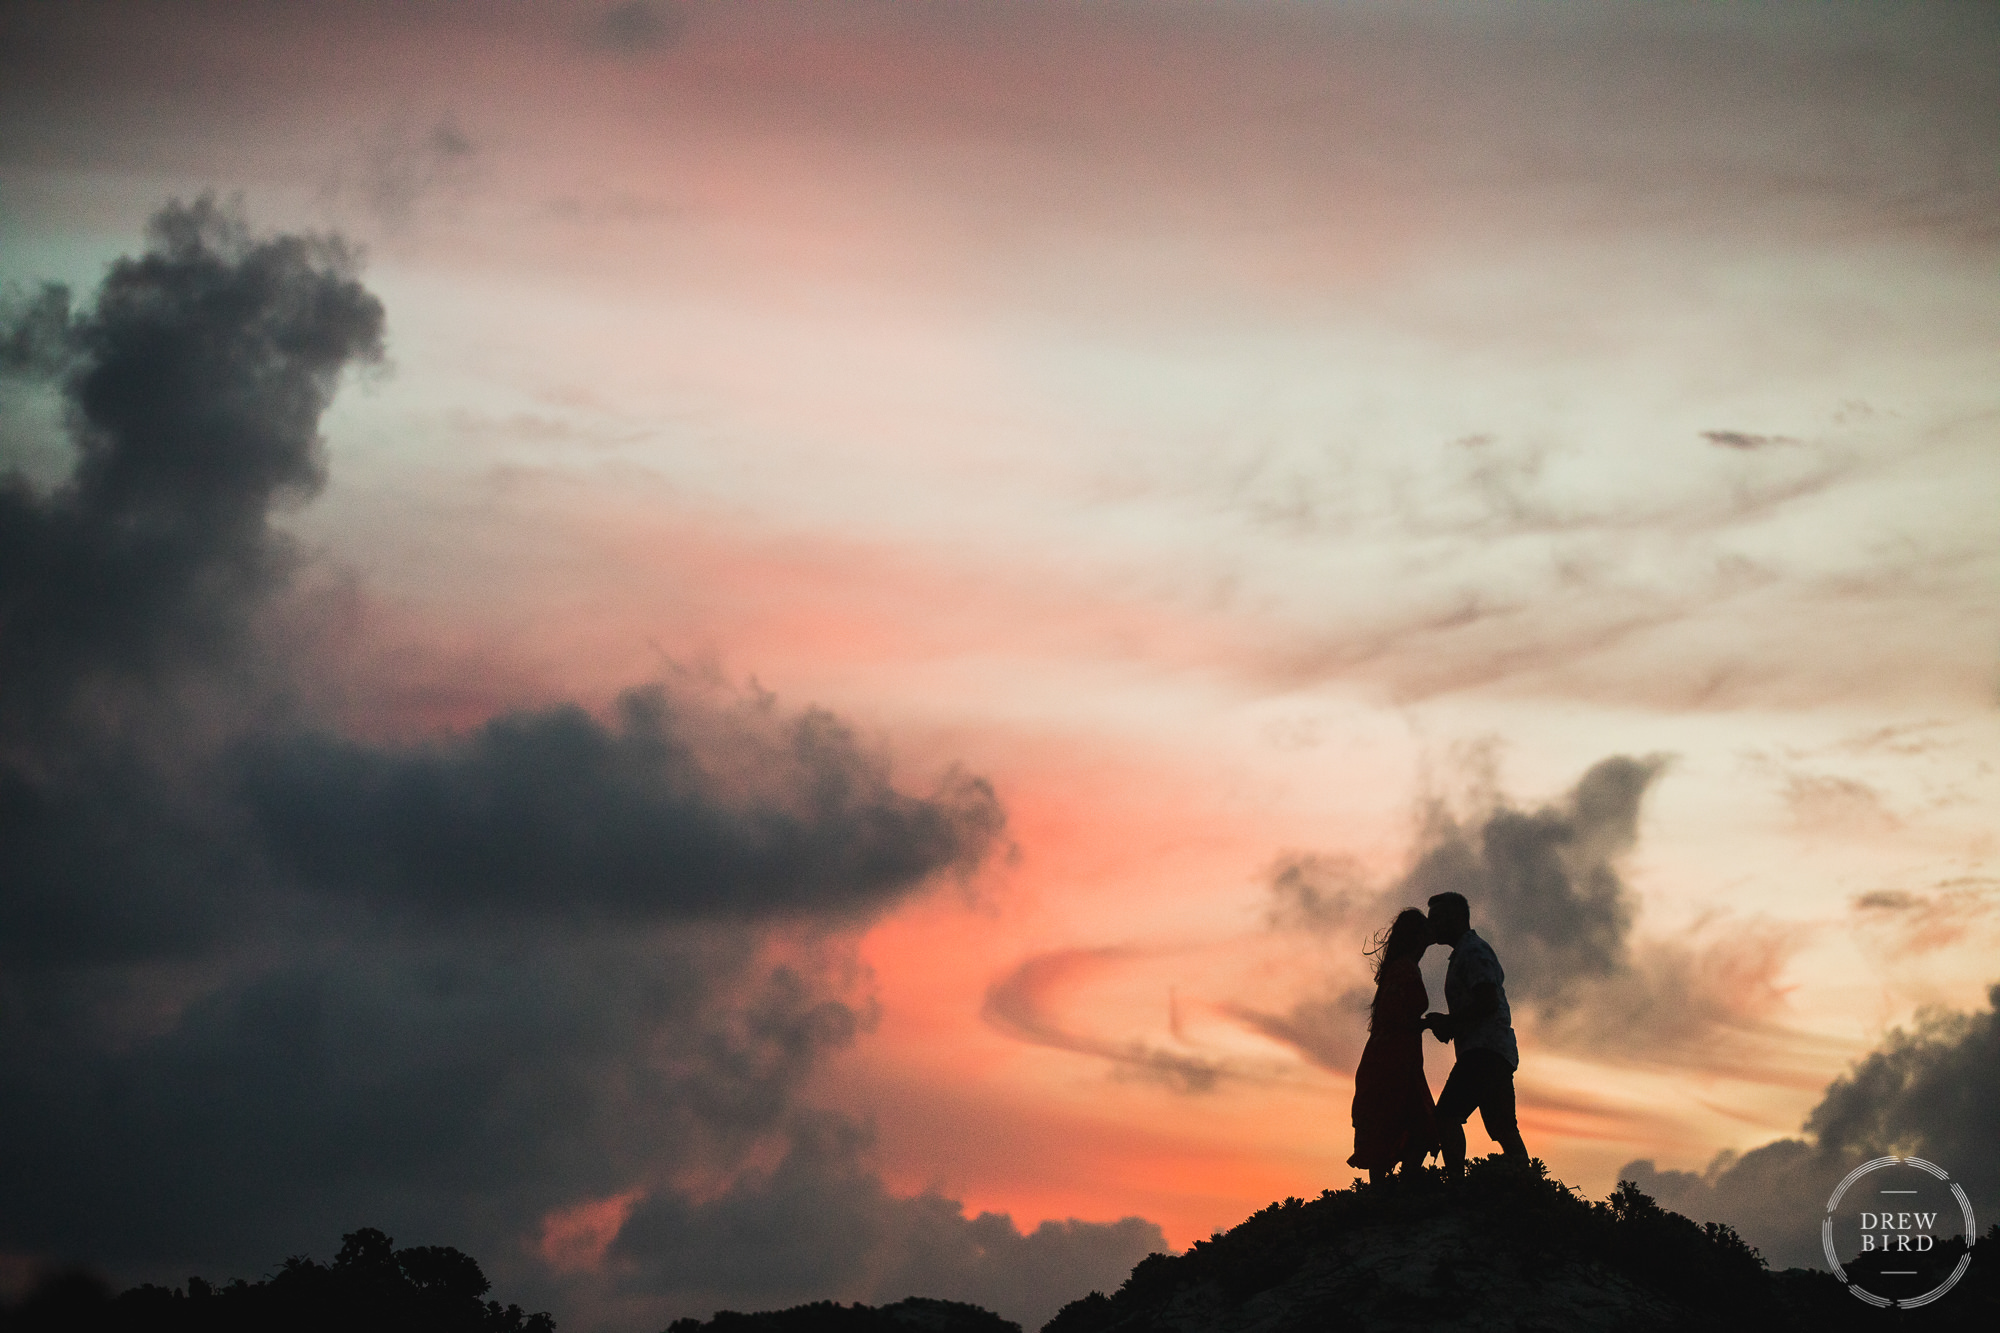 Silhouette of an Indian wedding bride and groom standing on sand dunes with sunset colors and a gorgeous sky. Destination wedding photography in Aruba by Drew Bird.